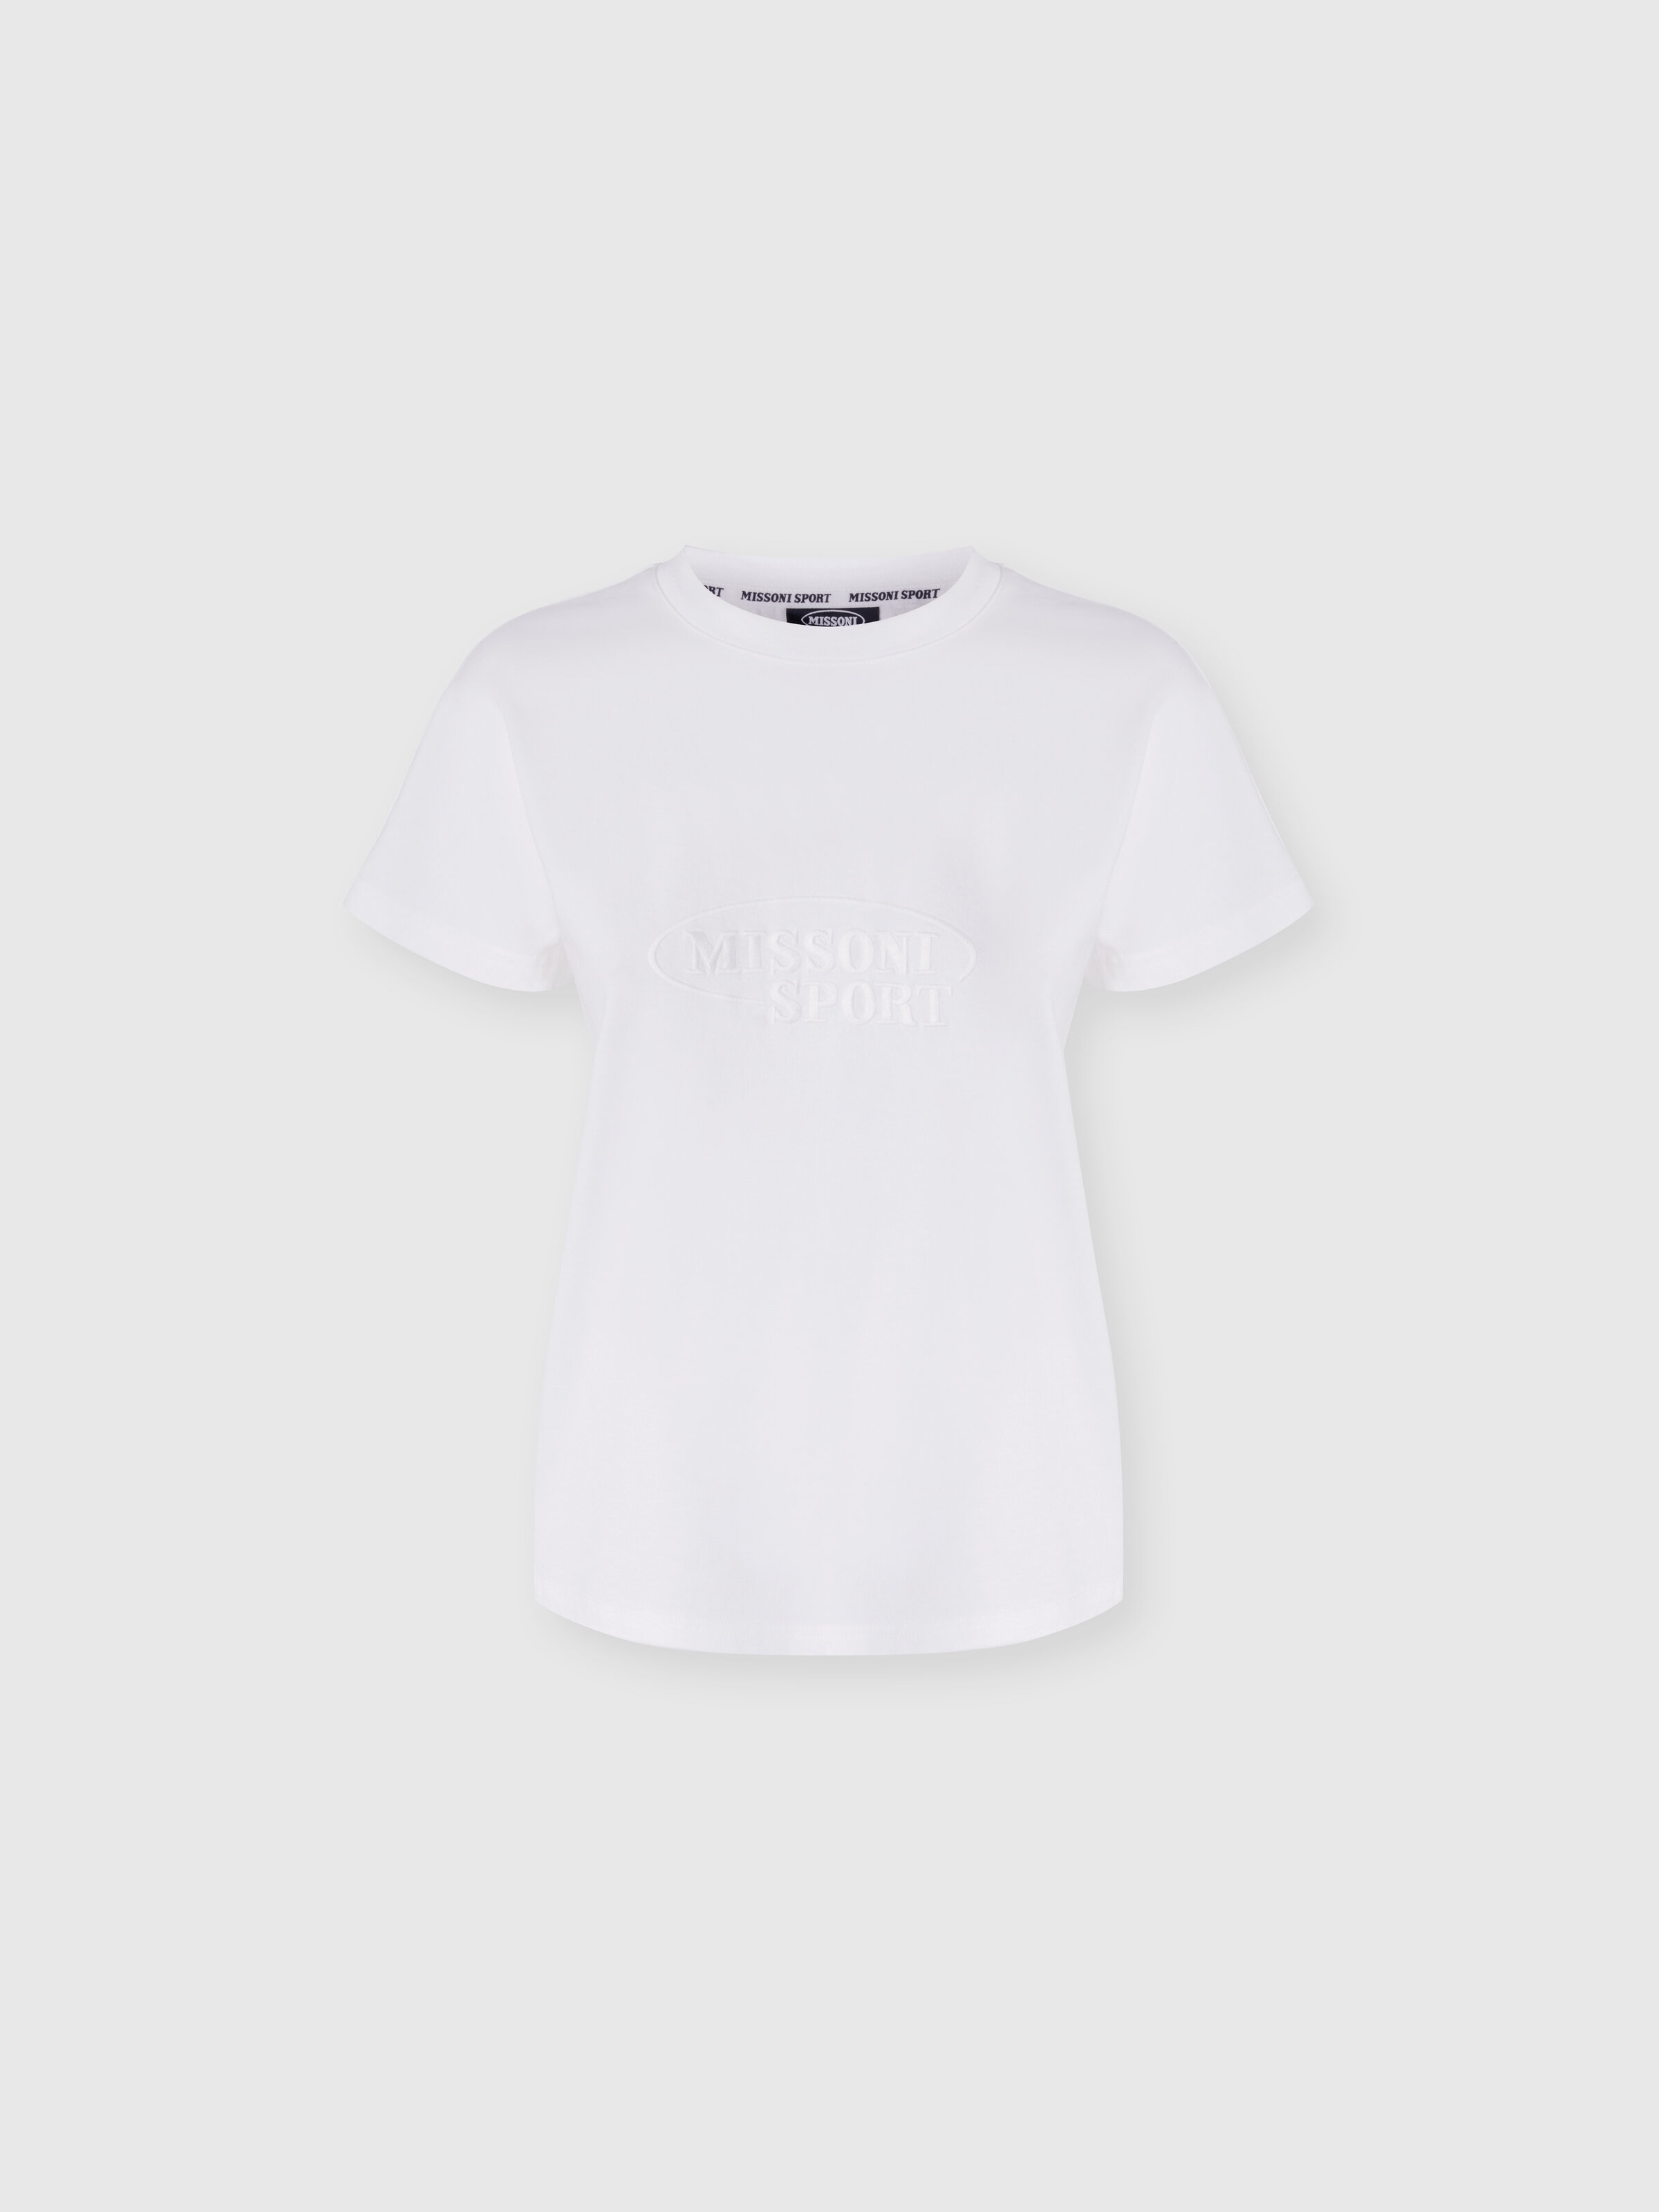 Crew-neck T-shirt in cotton with logo, White  - 0